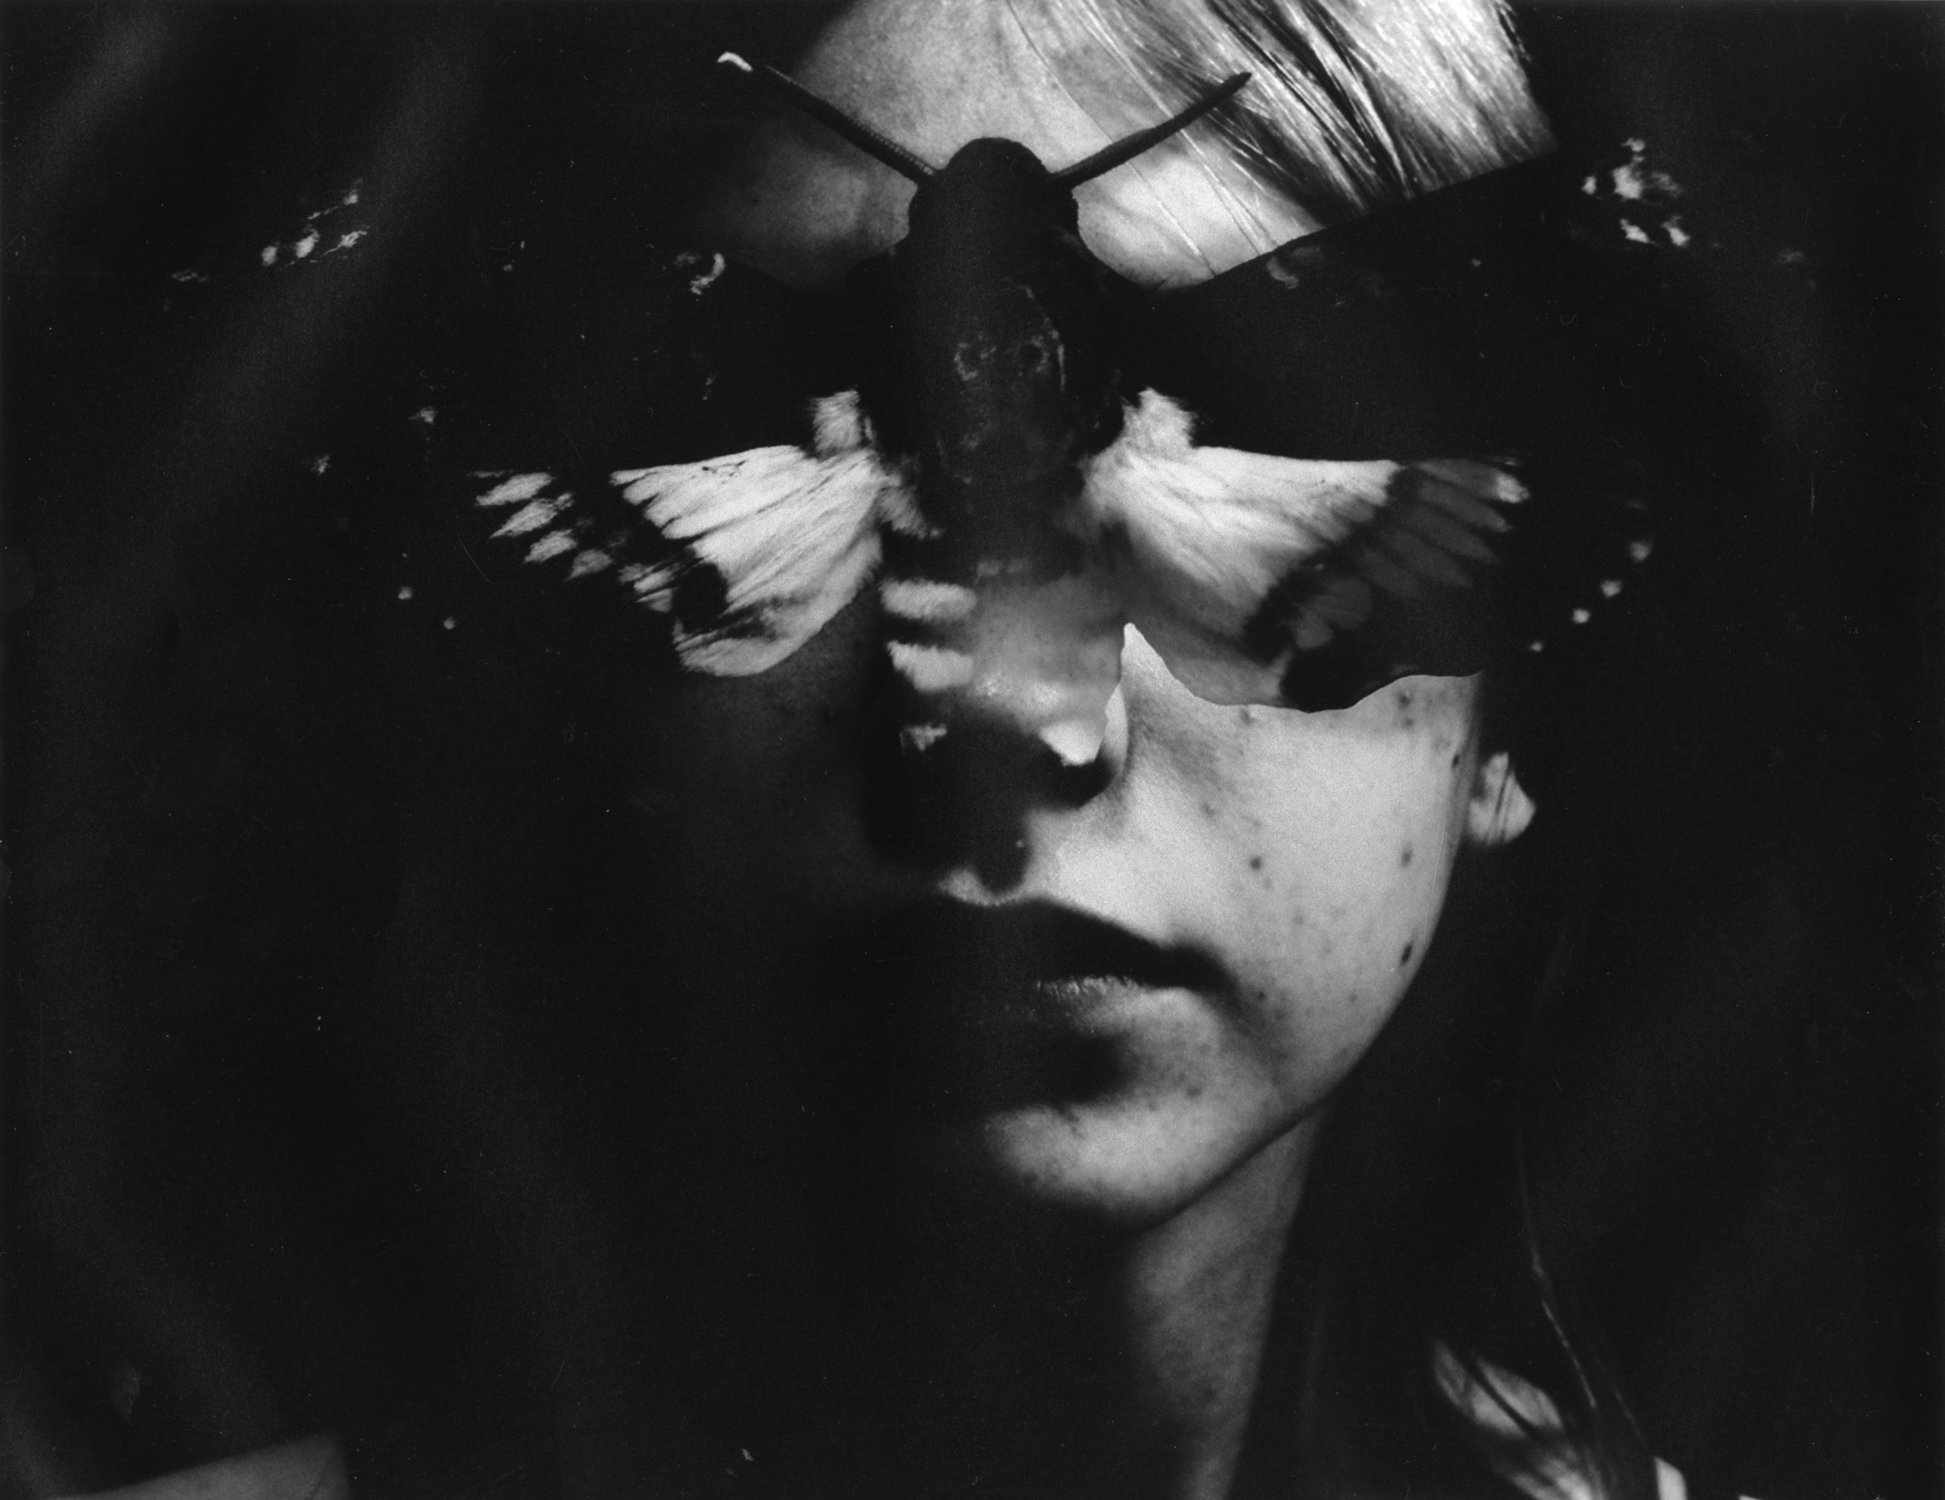 Black and white gelatin silver print of a woman's face with a death's-head moth blocking the eyes